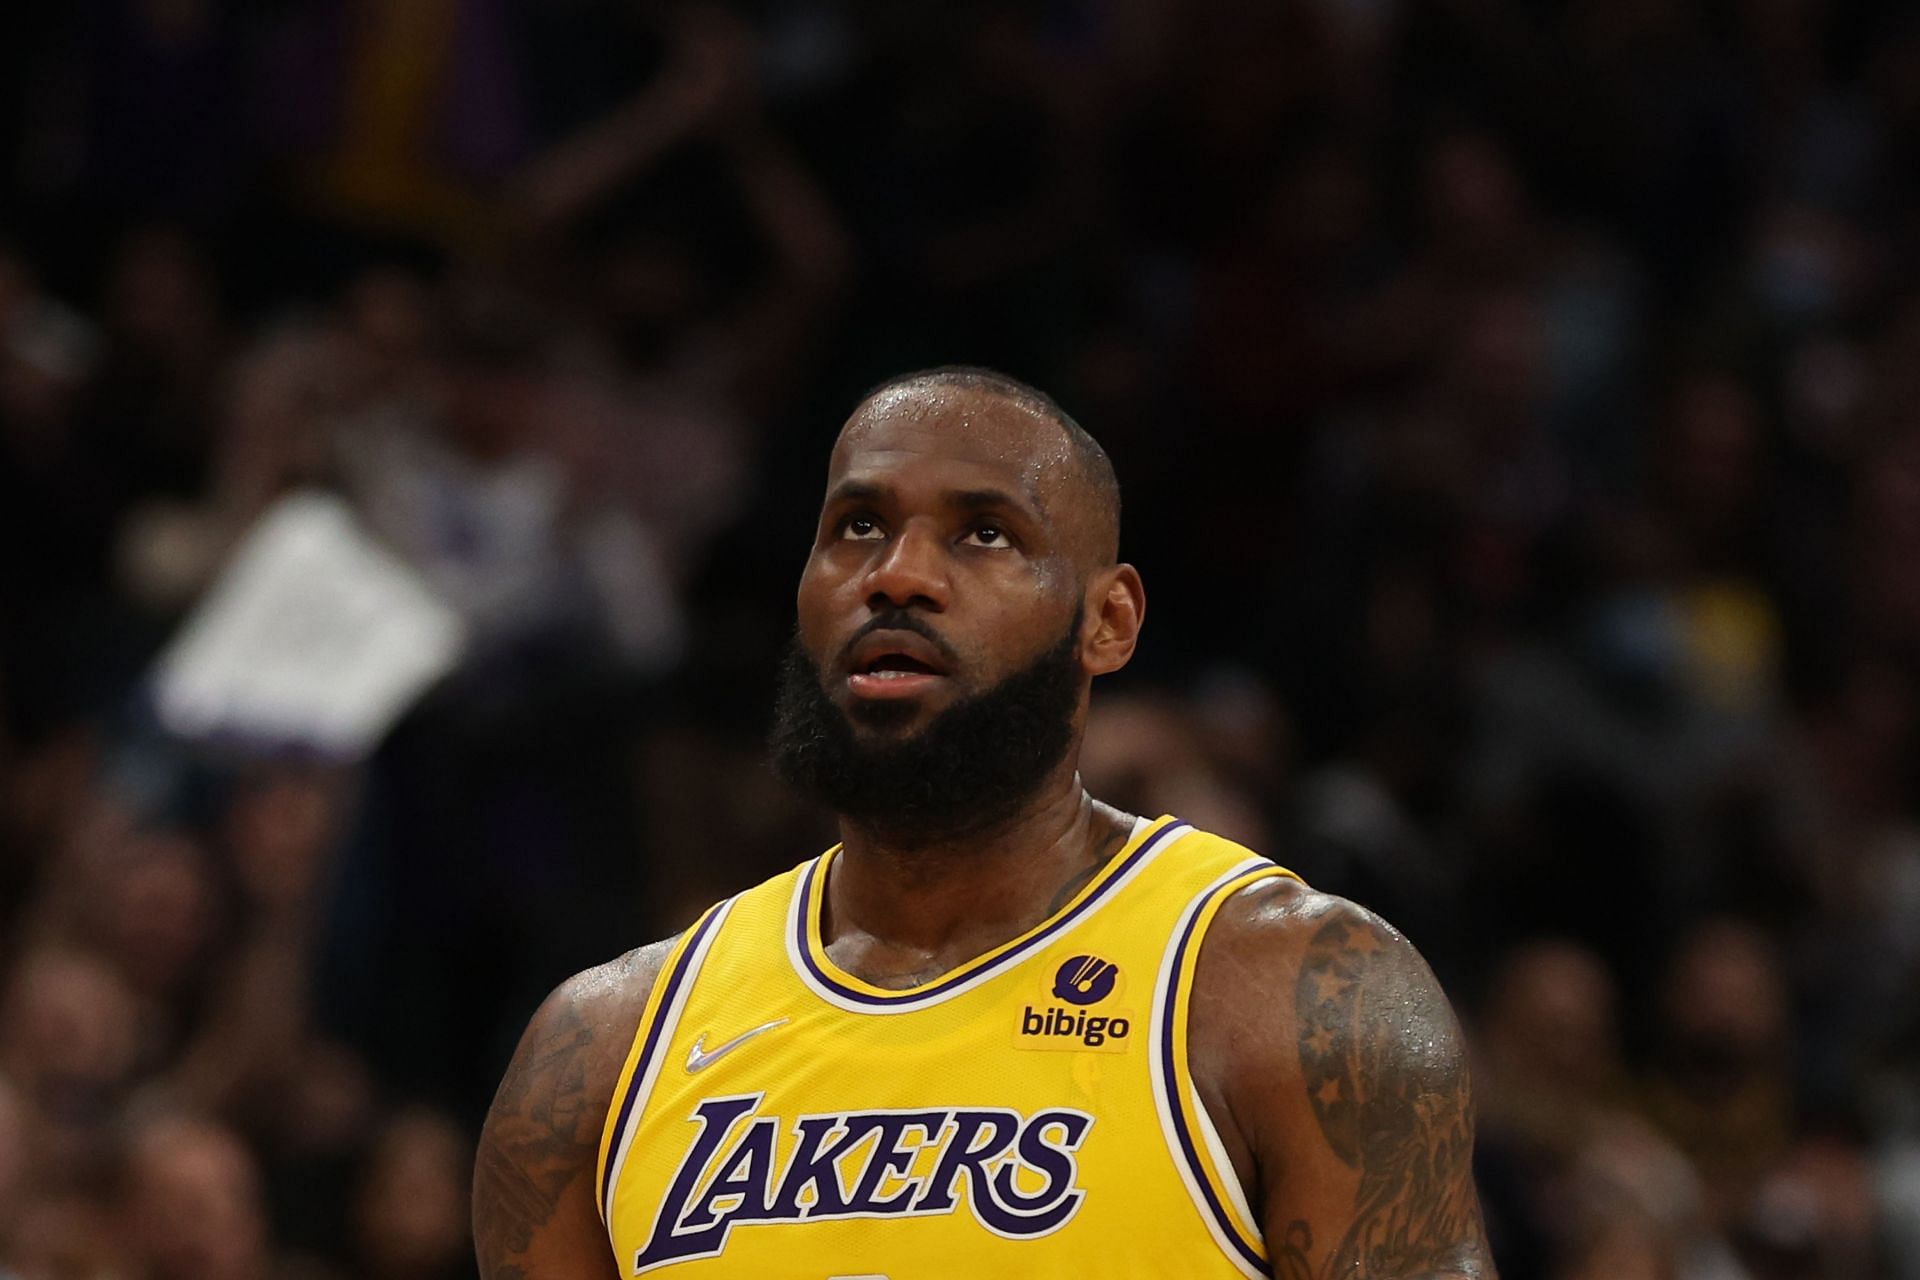 LeBron James #6 of the Los Angeles Lakers reacts after scoring against the Washington Wizards during the second quarter at Capital One Arena on March 19, 2022 in Washington, DC.